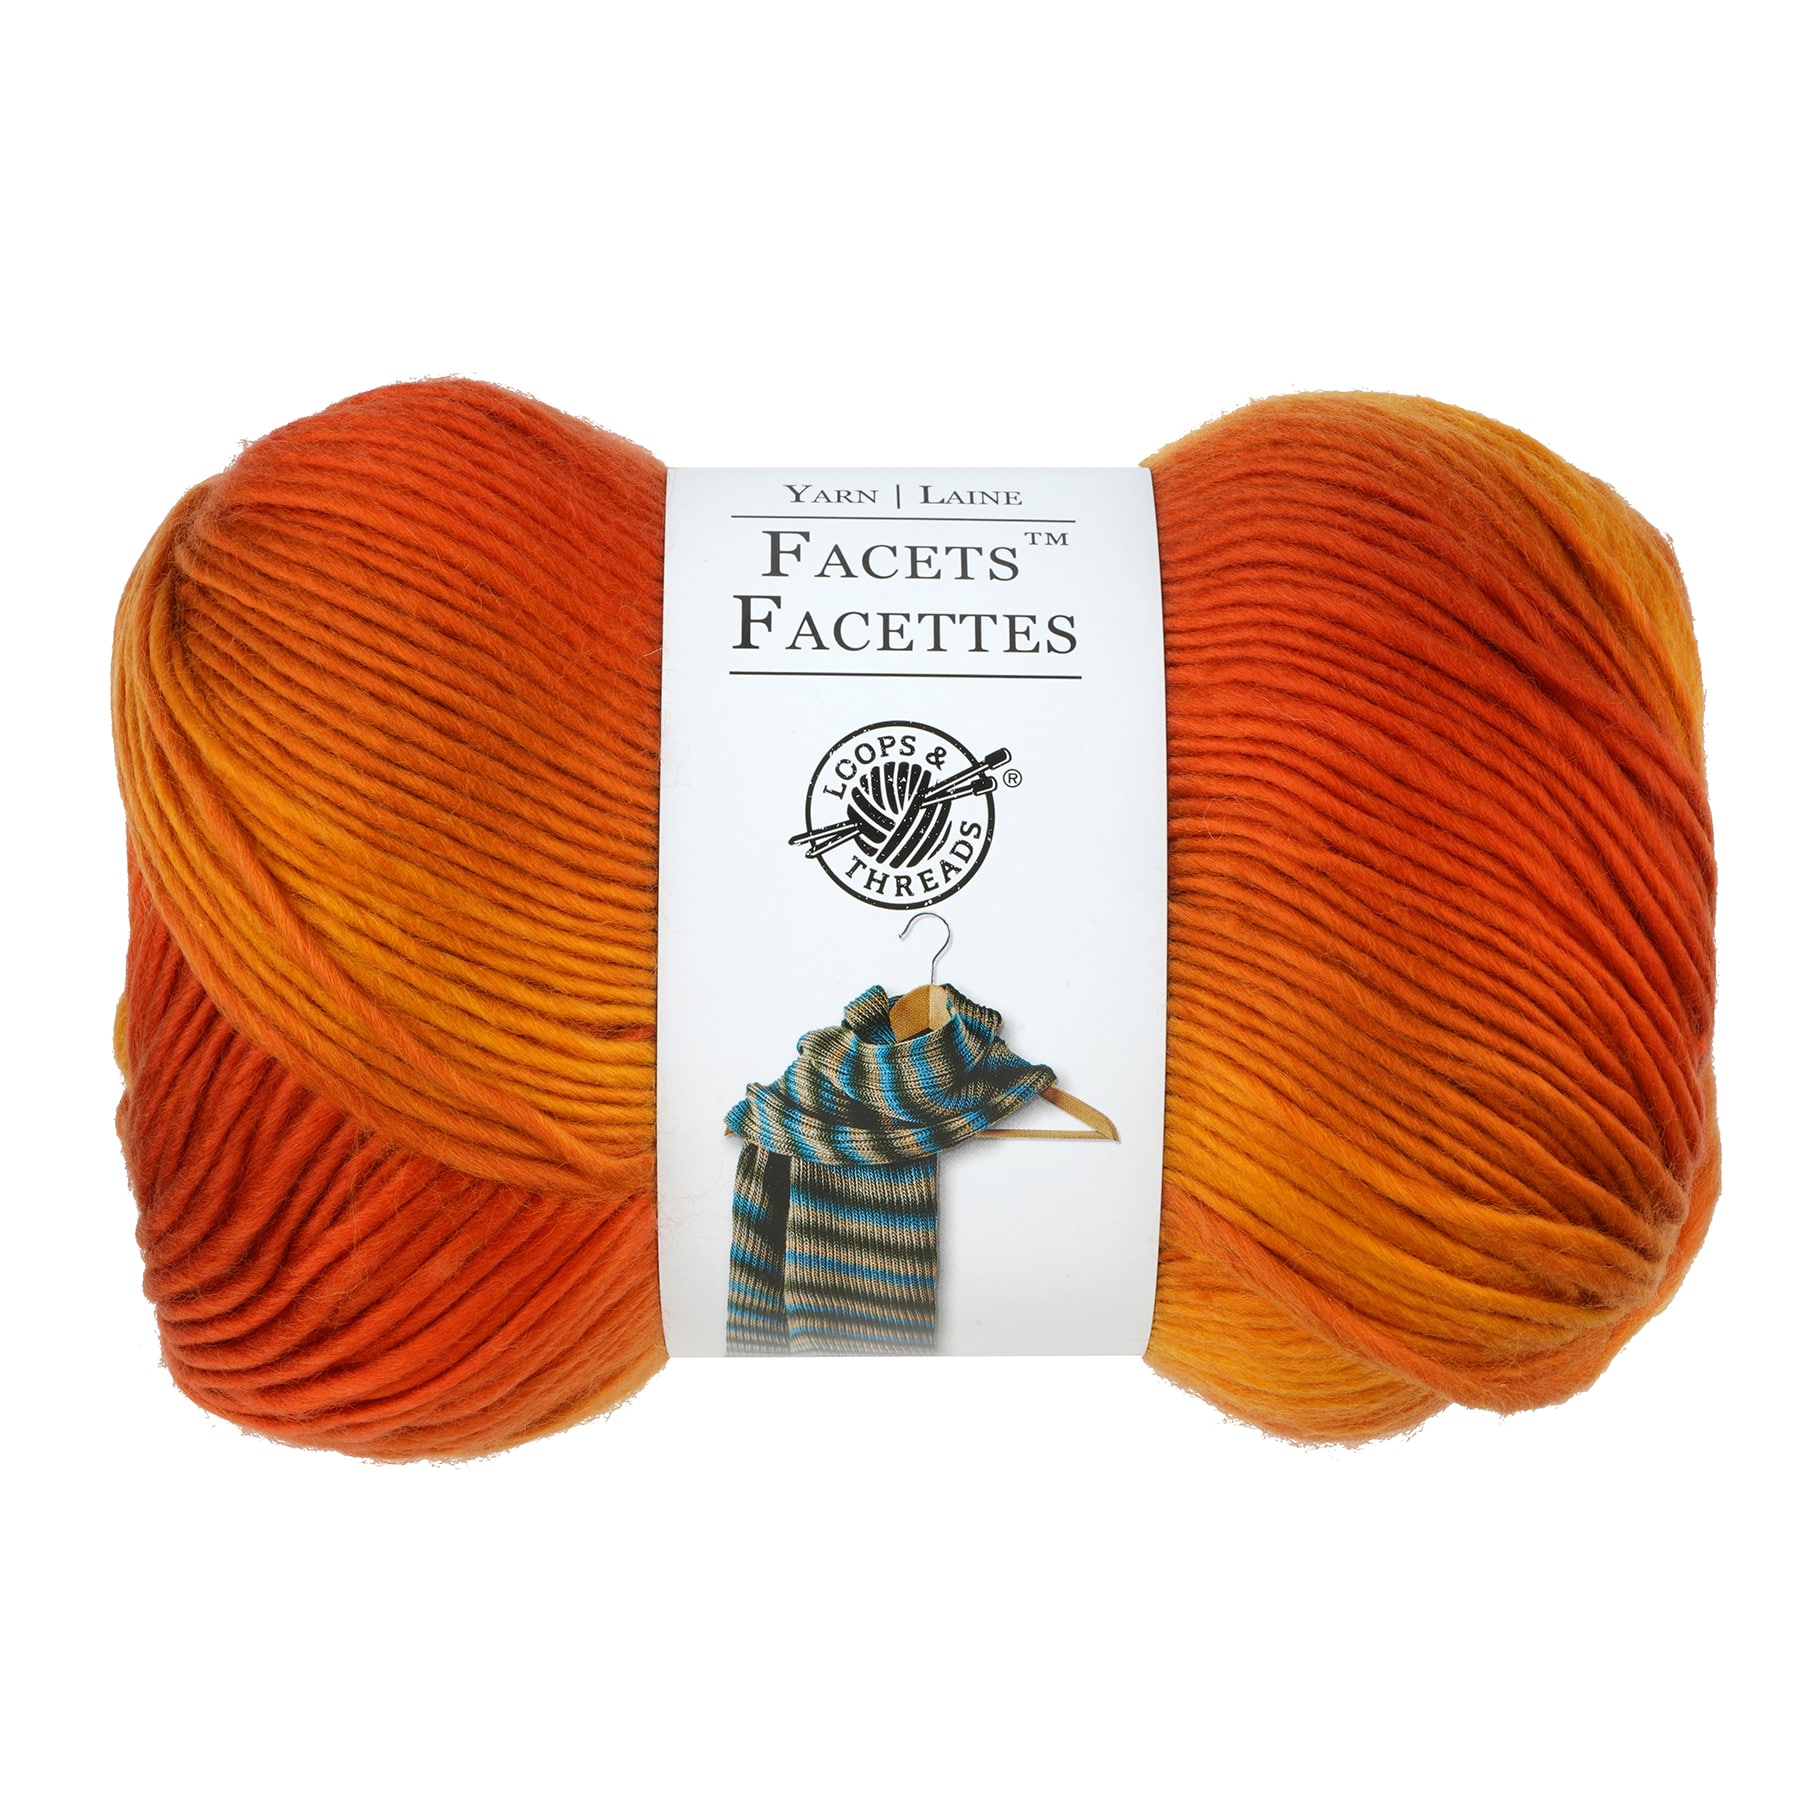 Facets™ Yarn by Loops & Threads® in Toffee, 3.5